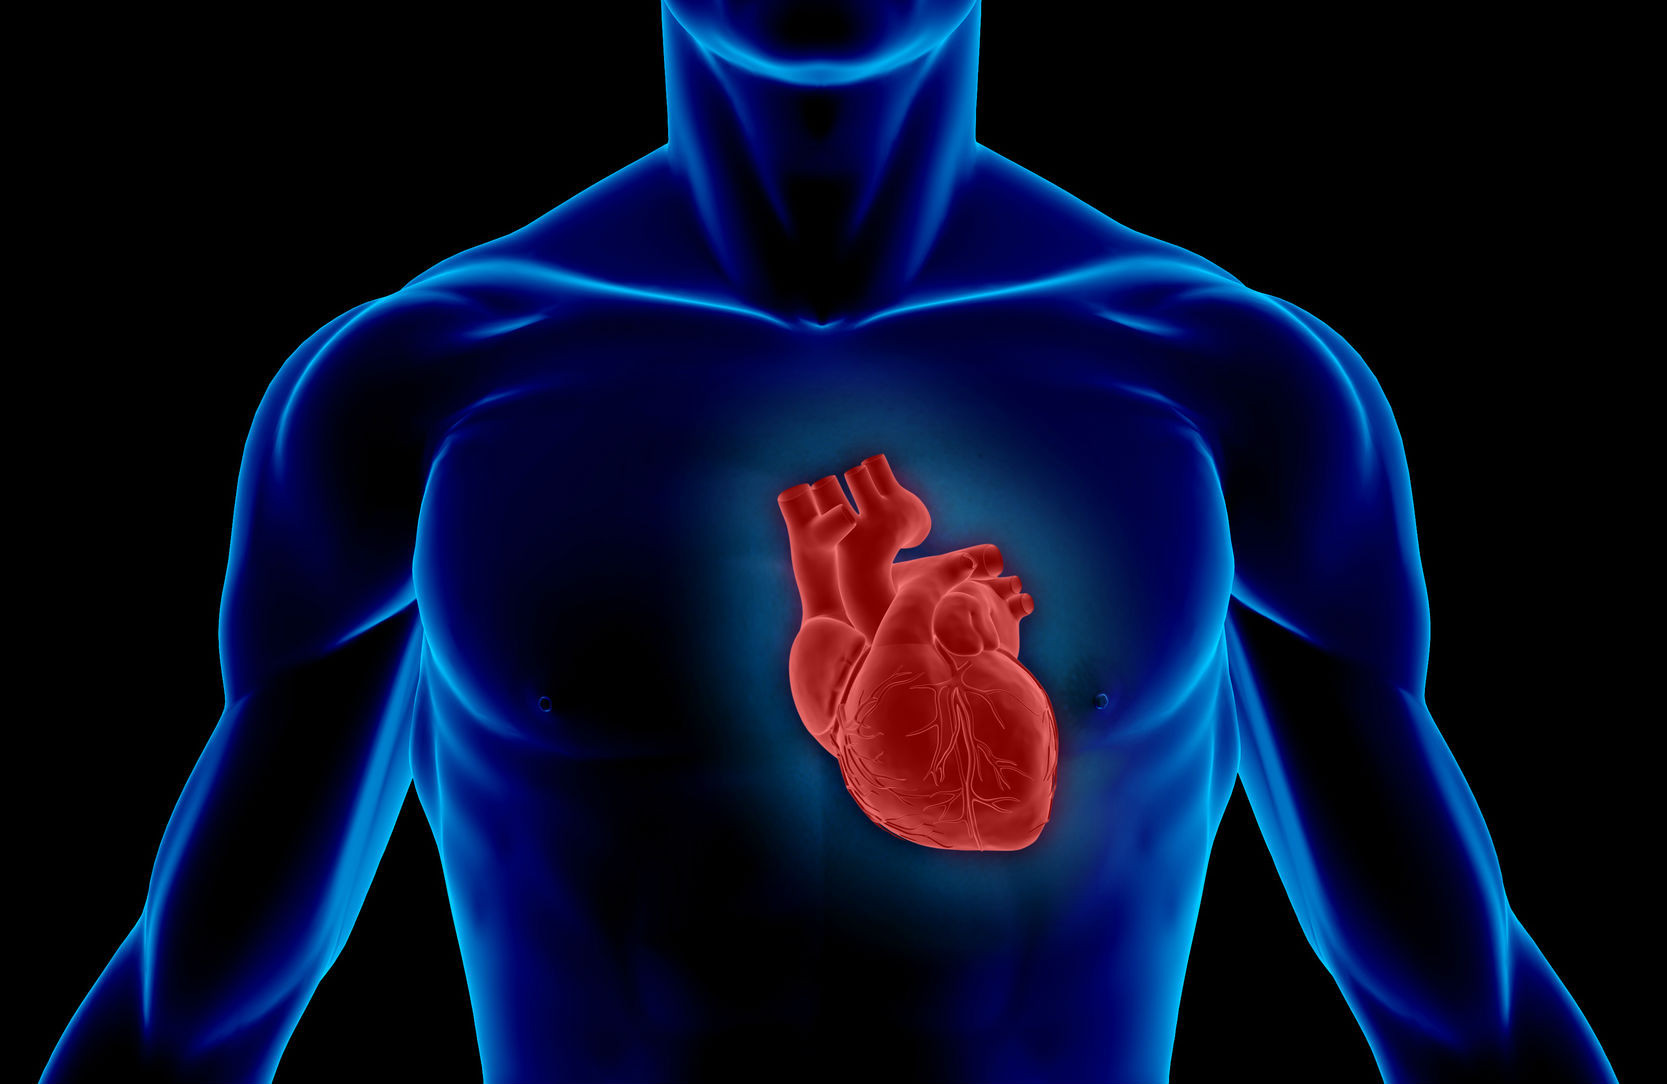 Image of a person silhouette revealing a red colored heart.